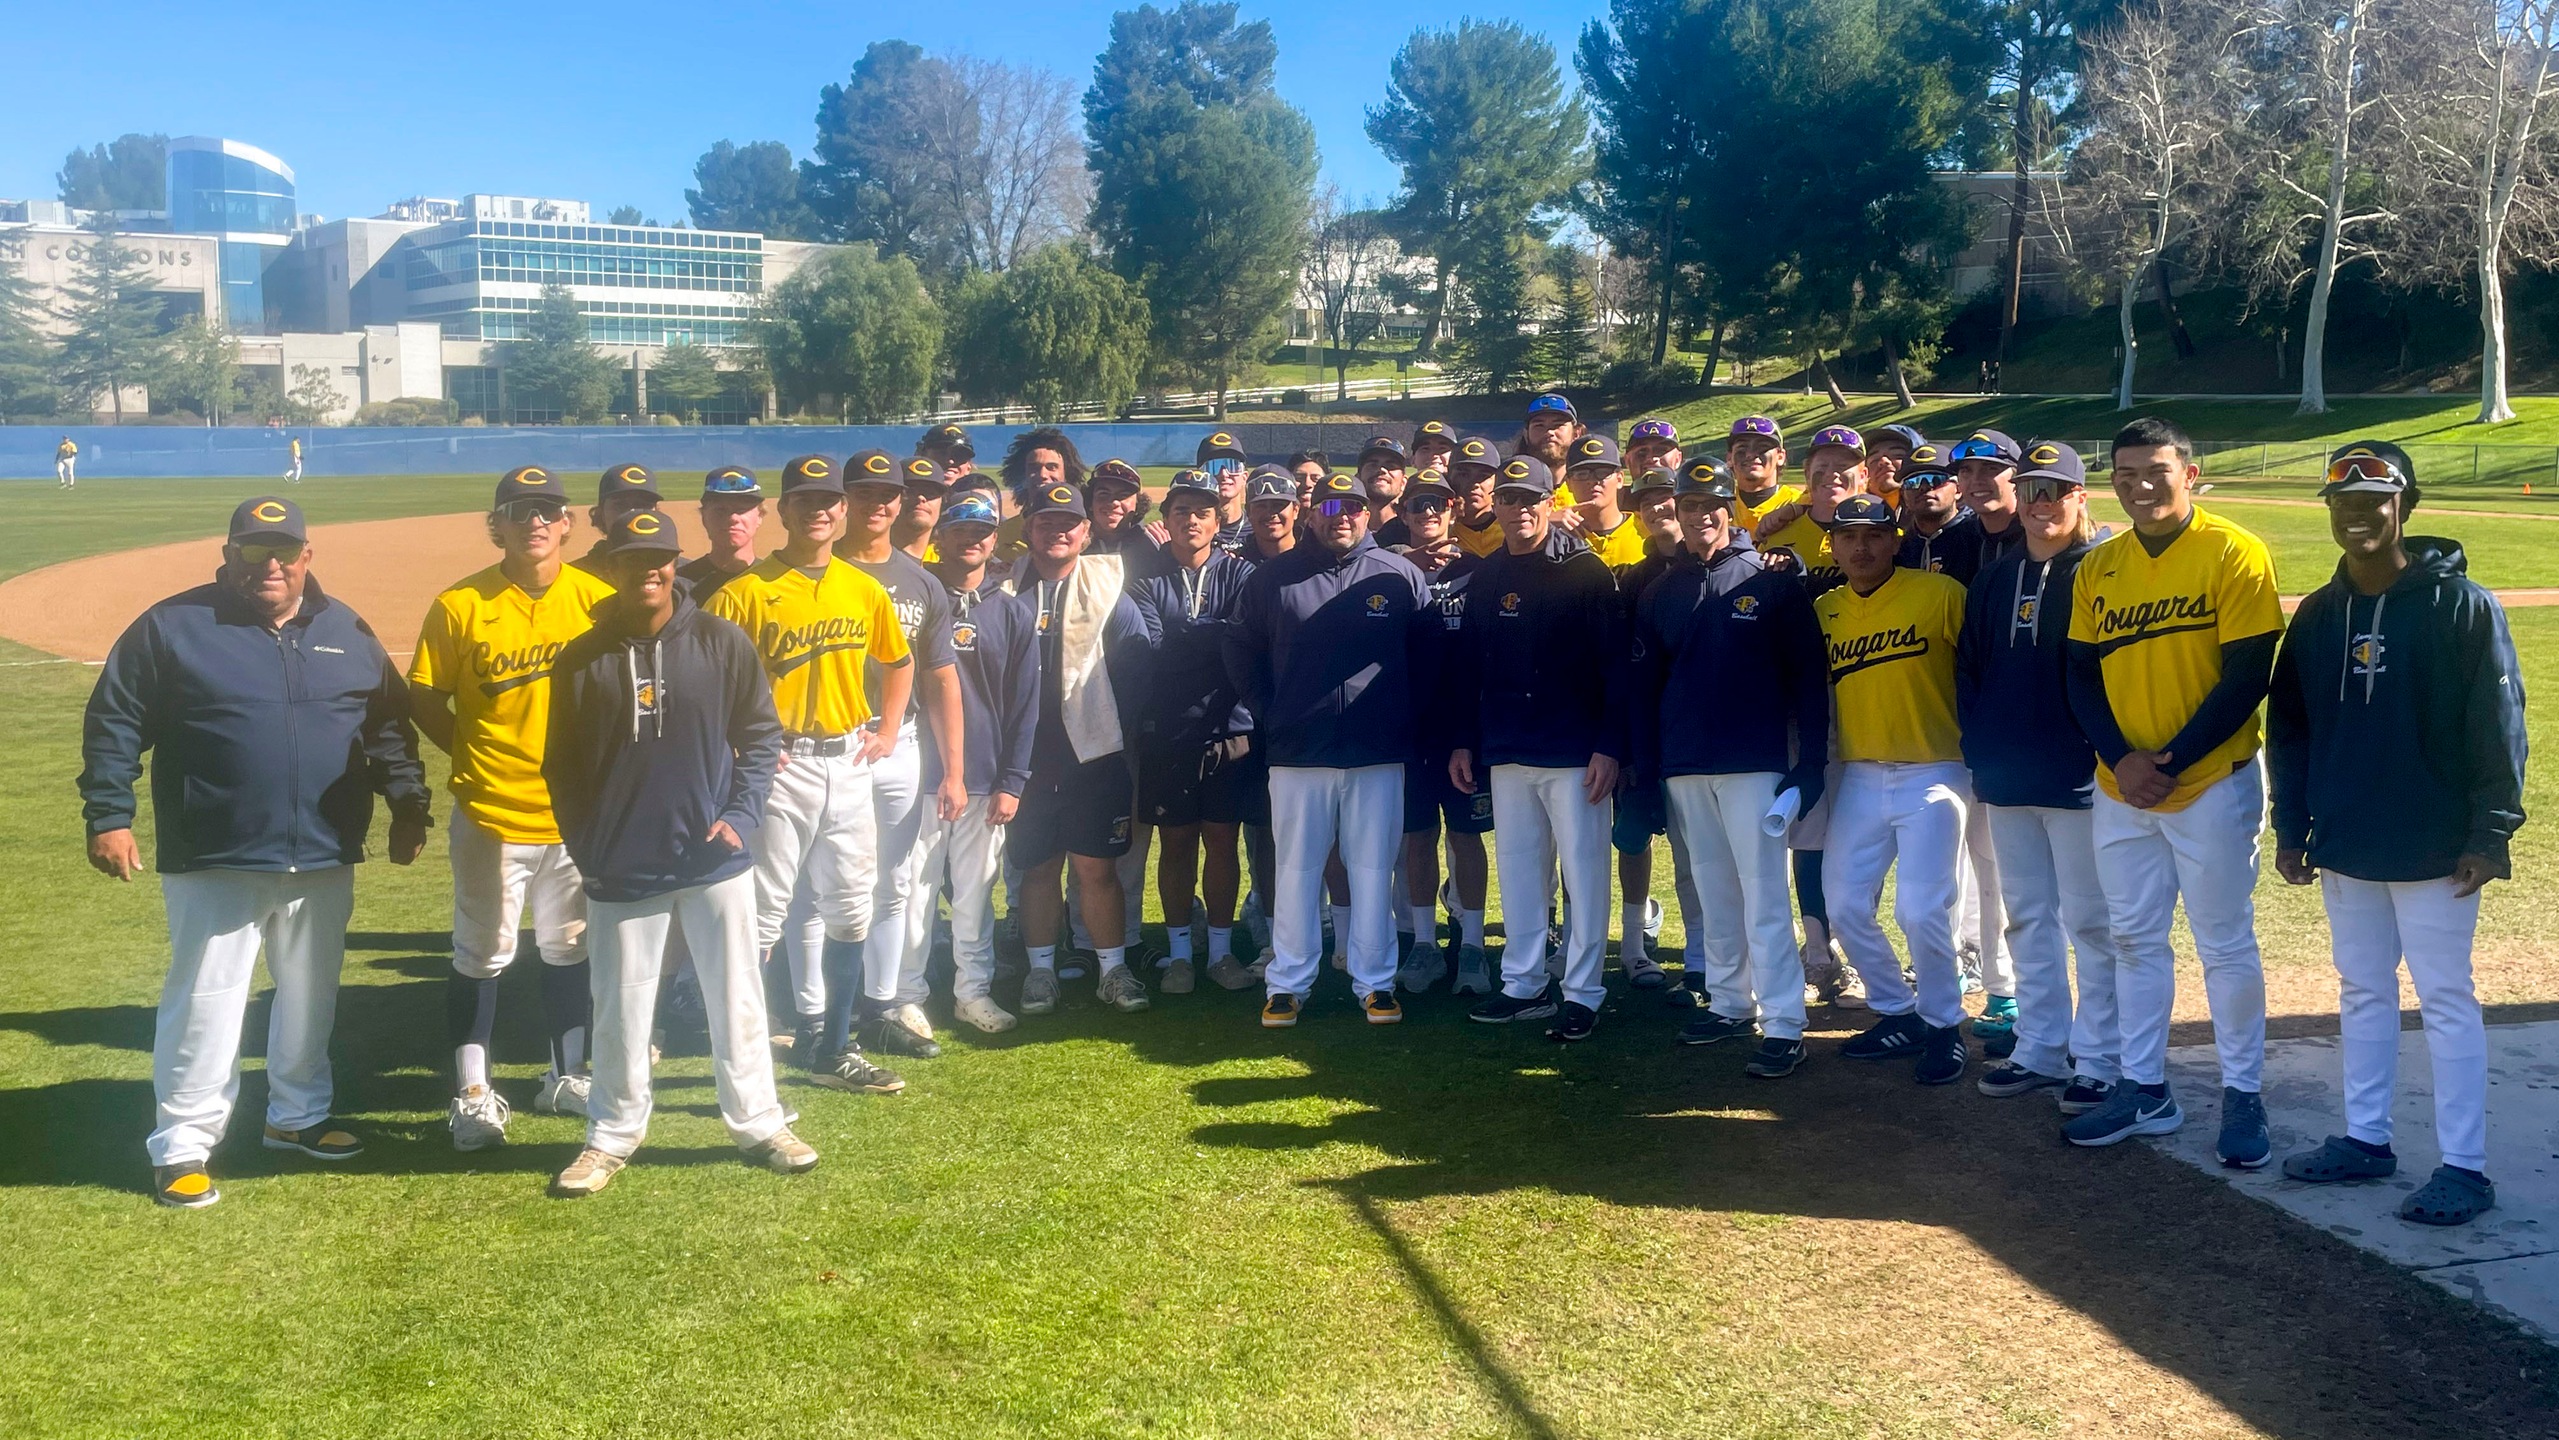 College of the Canyons baseball team photo after the game vs. Cosumnes River College on Saturday, Feb. 10.